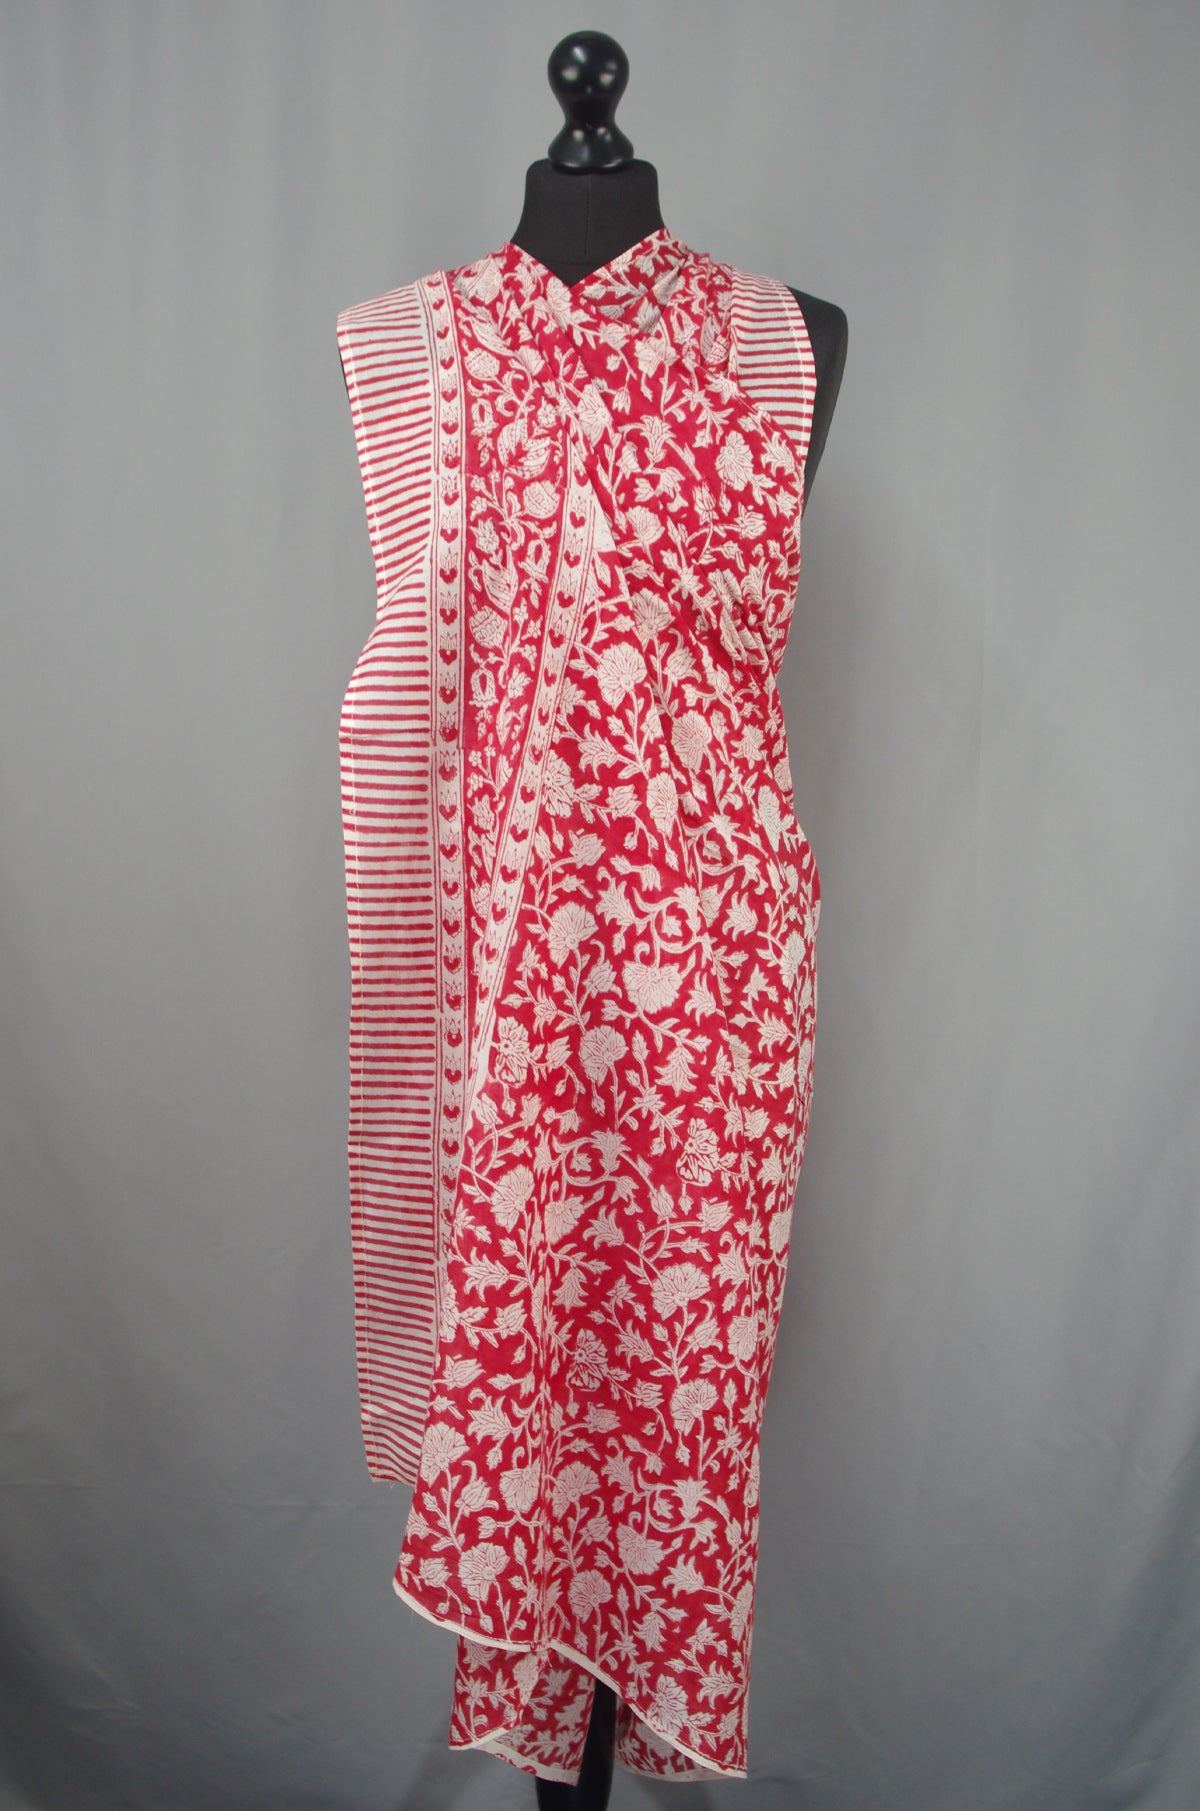 Beach Coverup Sarong Pareo - Red Floral